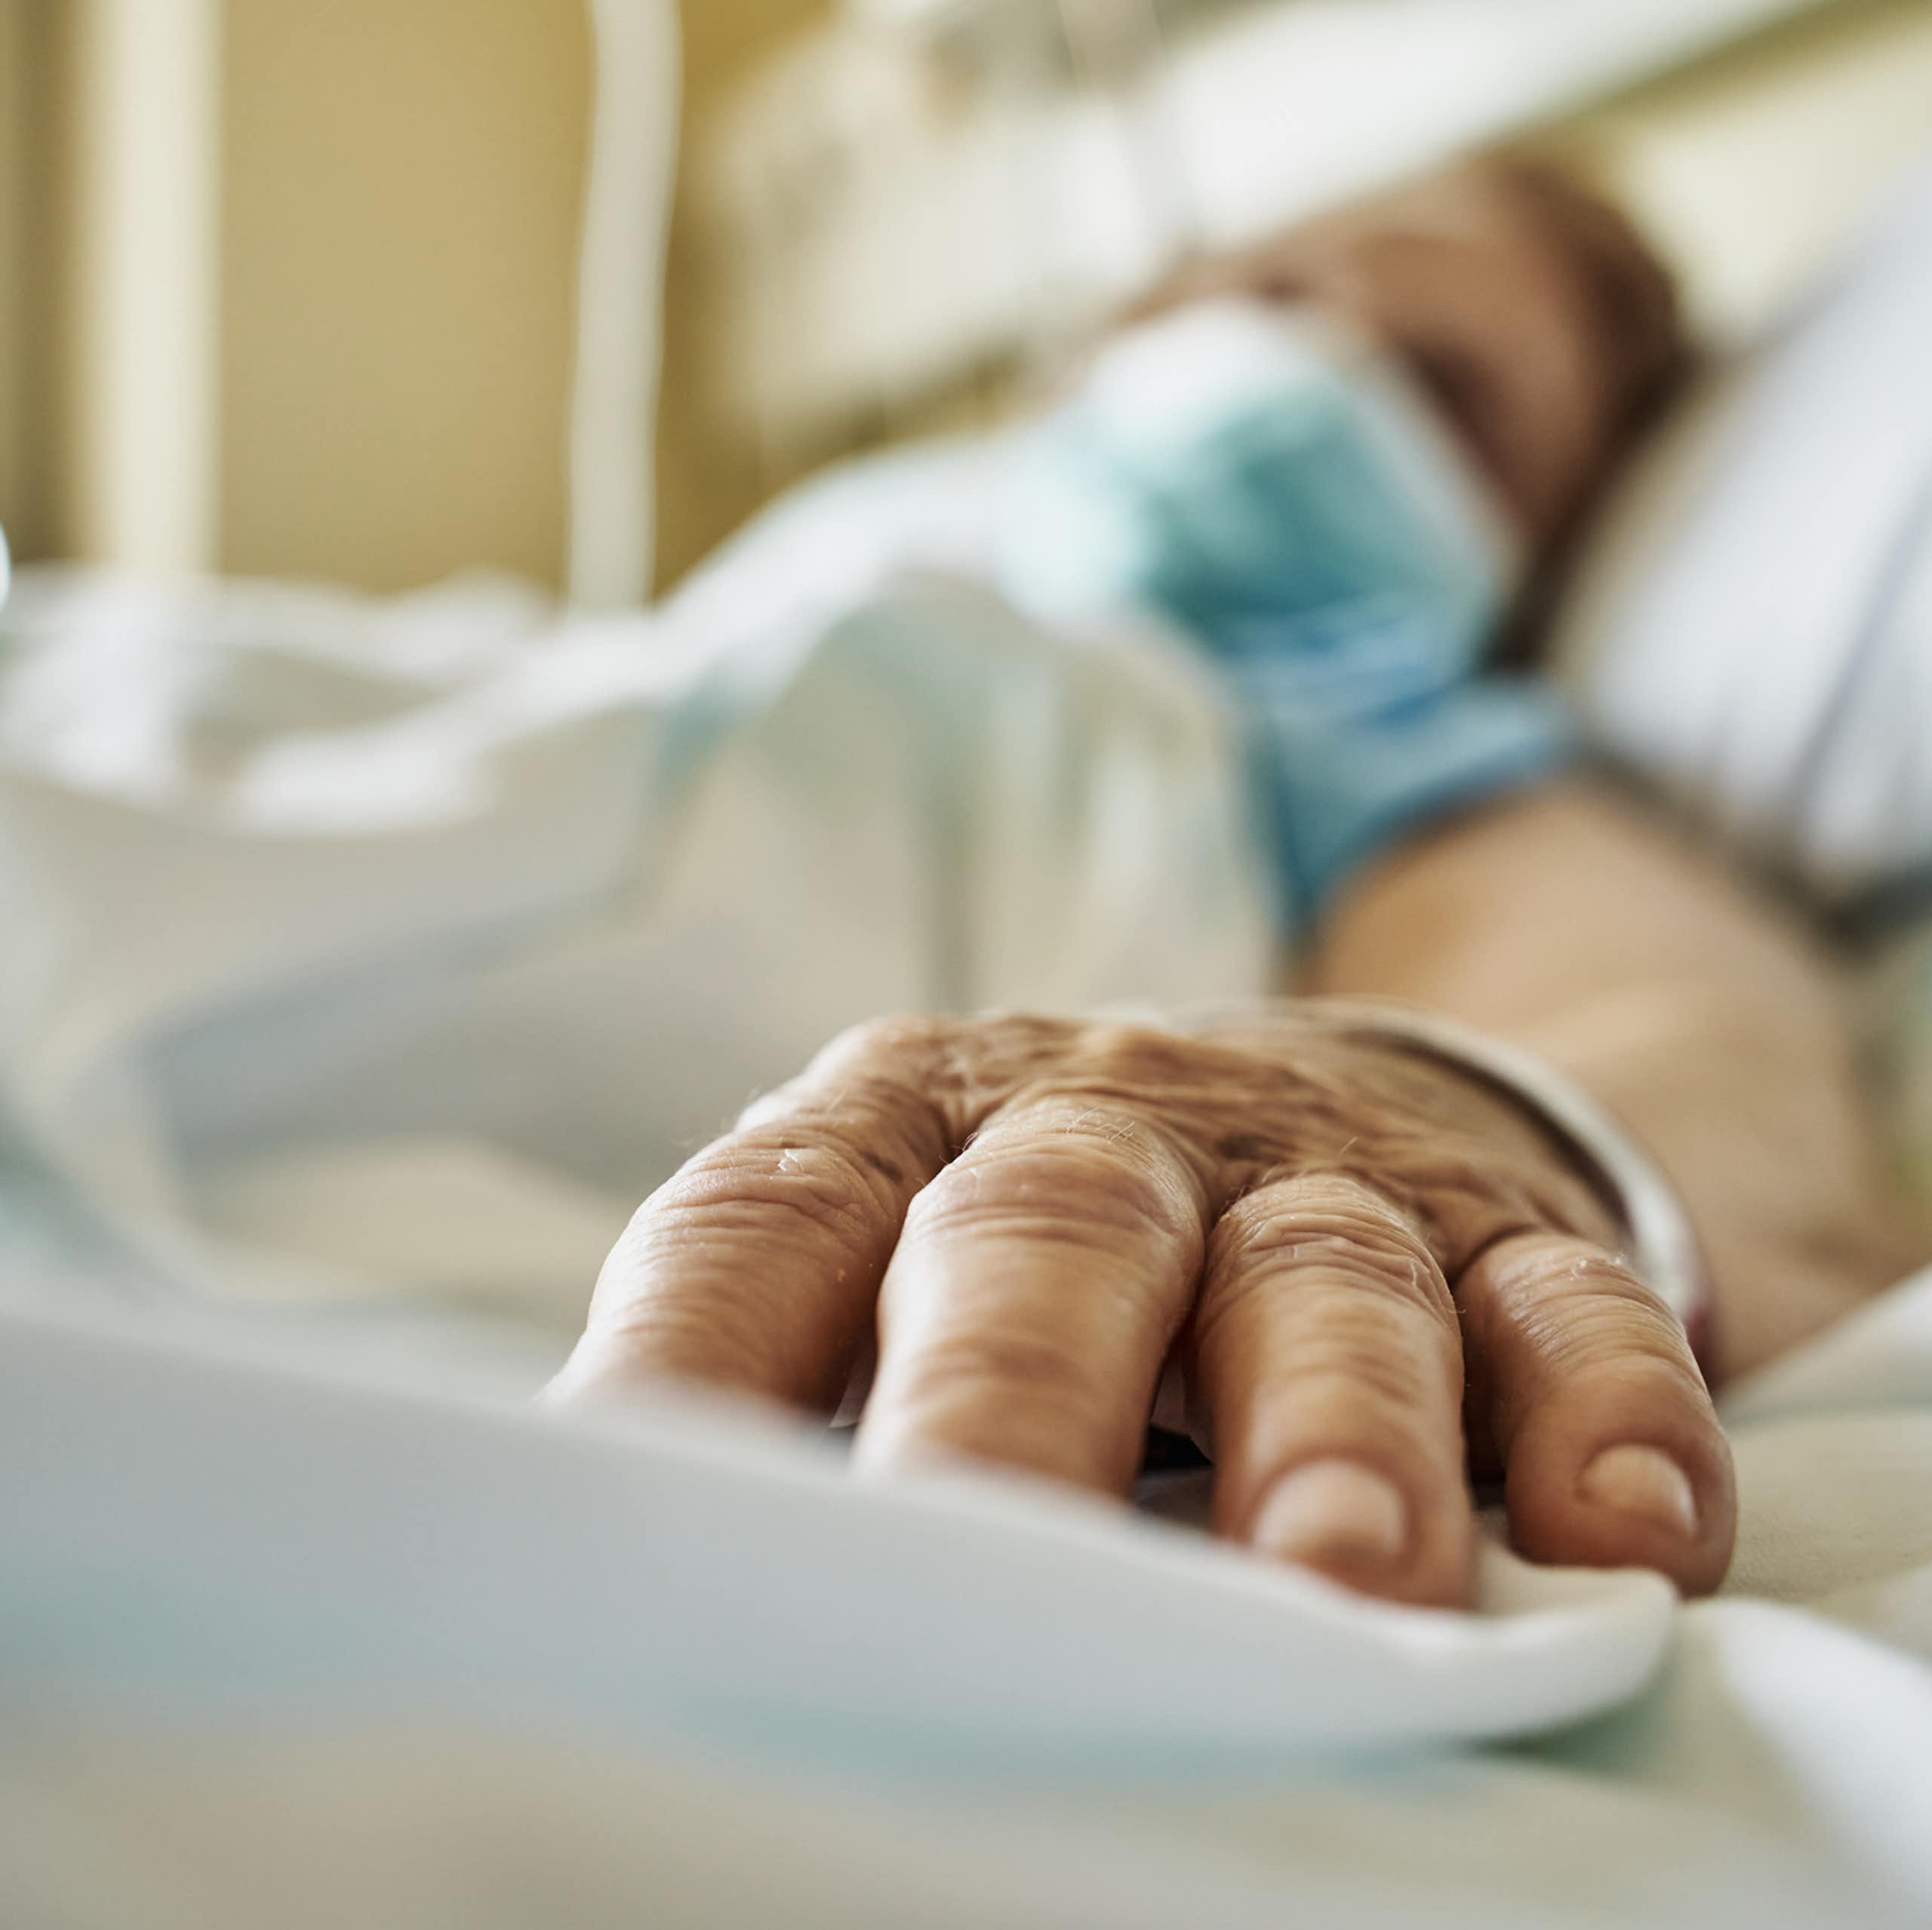 Patient wearing mask lying on hospital bed, hand extended toward camera